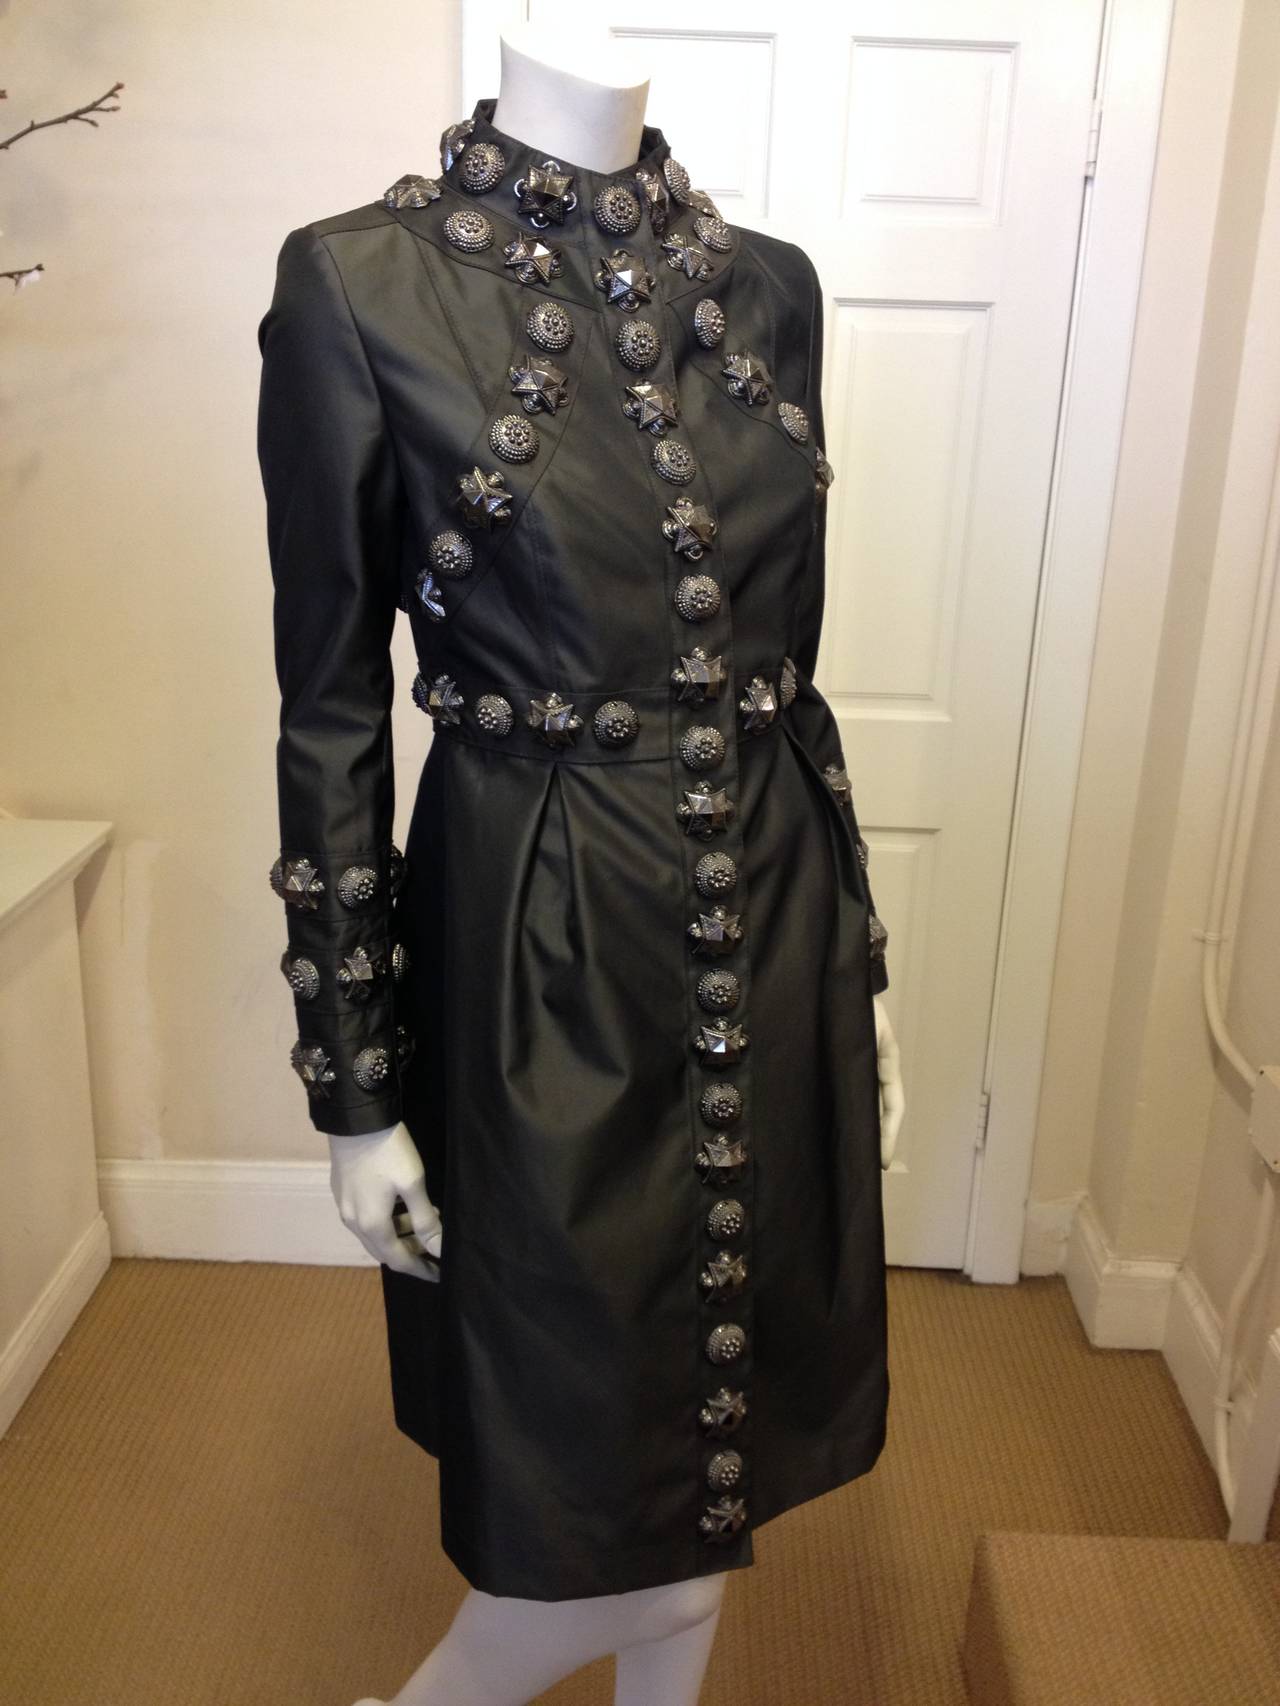 This coat is over the top! In glossy gunmetal grey taffeta, it features big and intricately embossed pewter-colored studs marching across the chest like a British coat of arms. The high neck, long sleeves, and mid-calf hemline add an angularity and